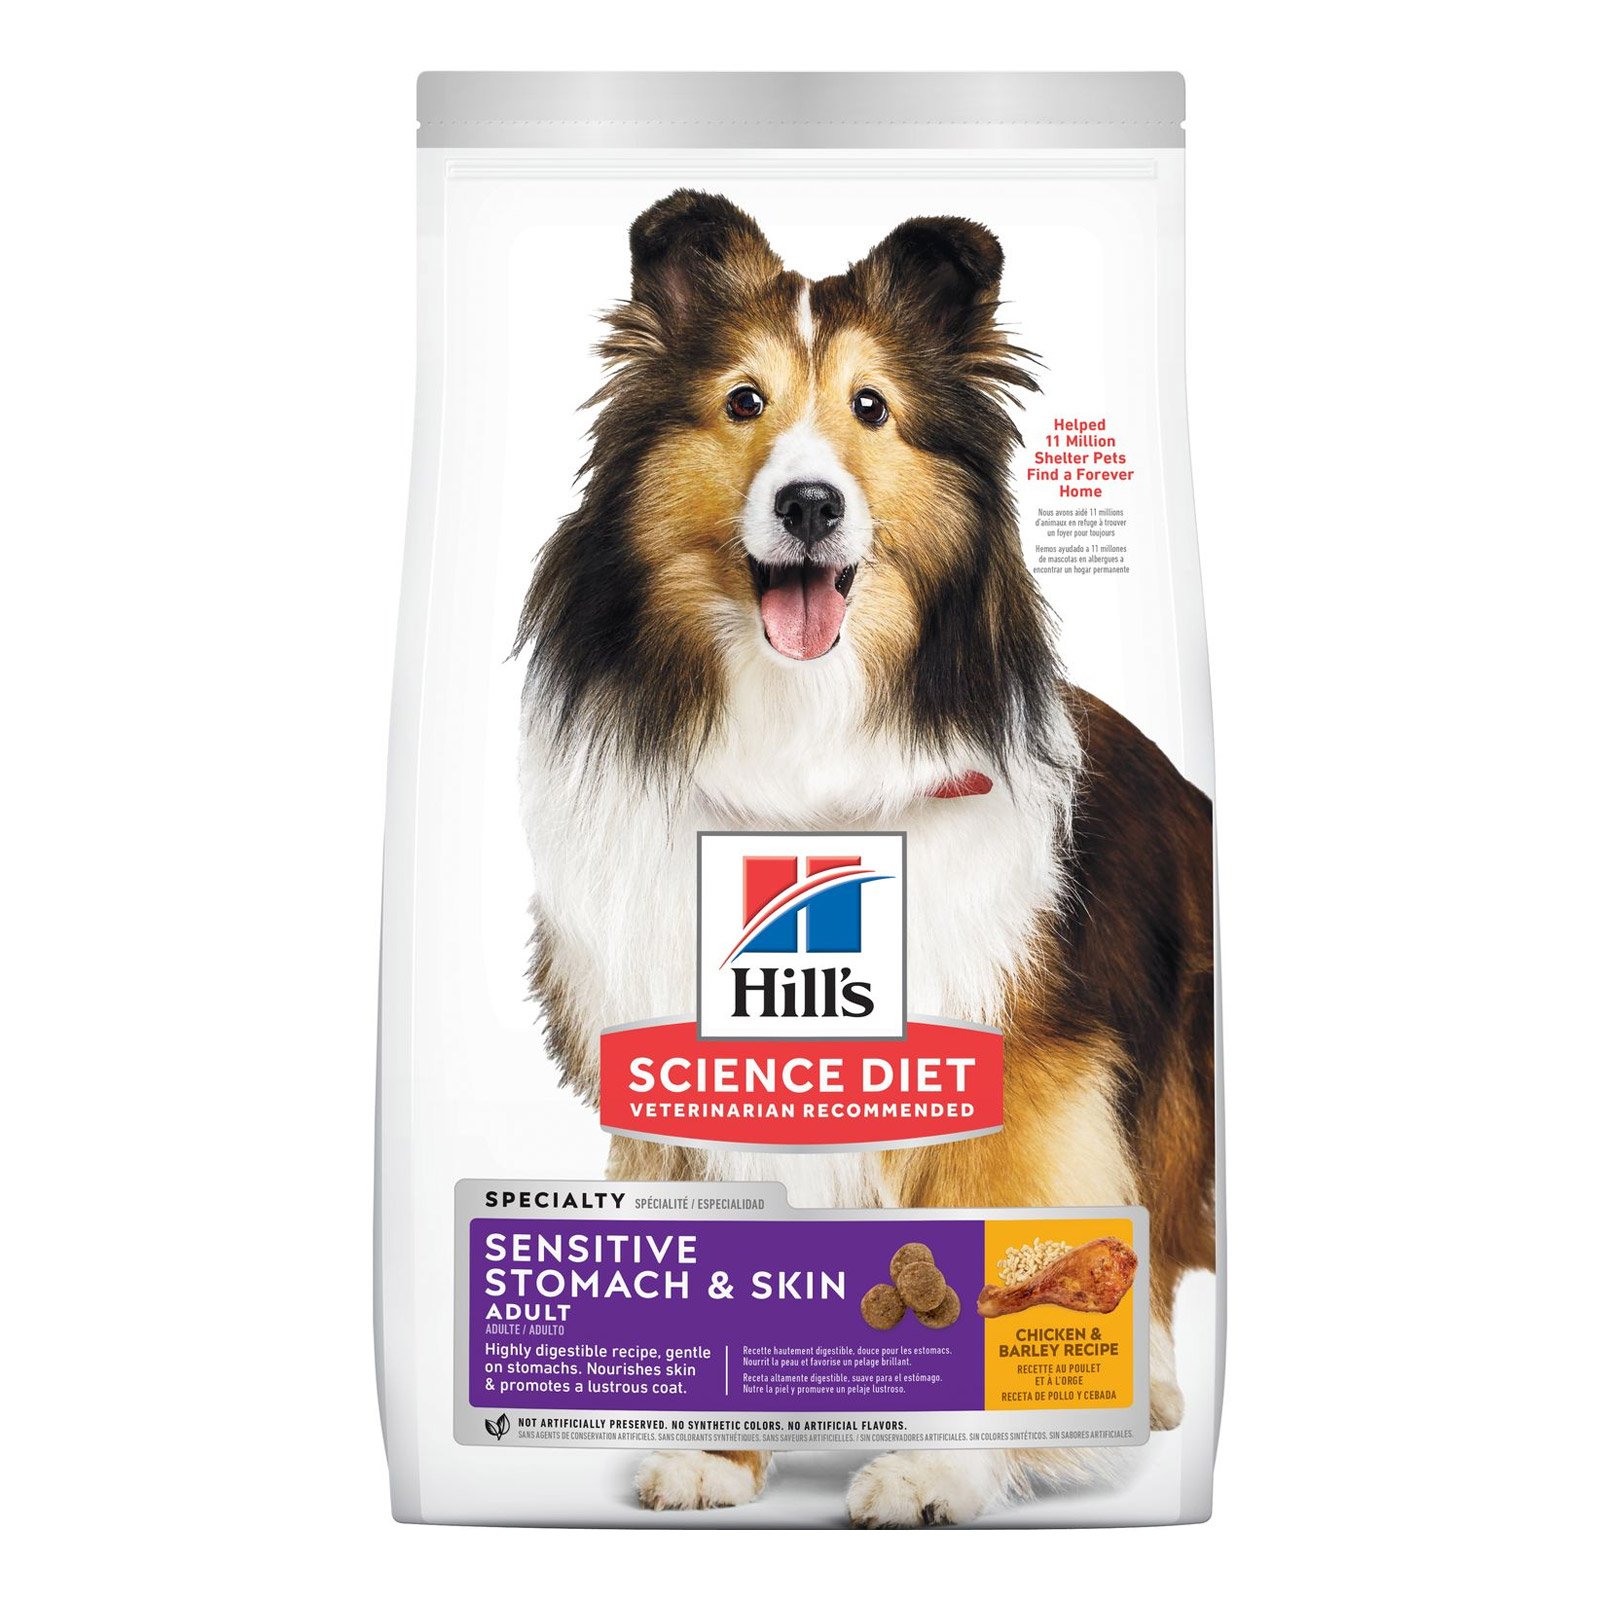 Hill's Science Diet Adult Sensitive Stomach & Skin Large Breed Dog Food 